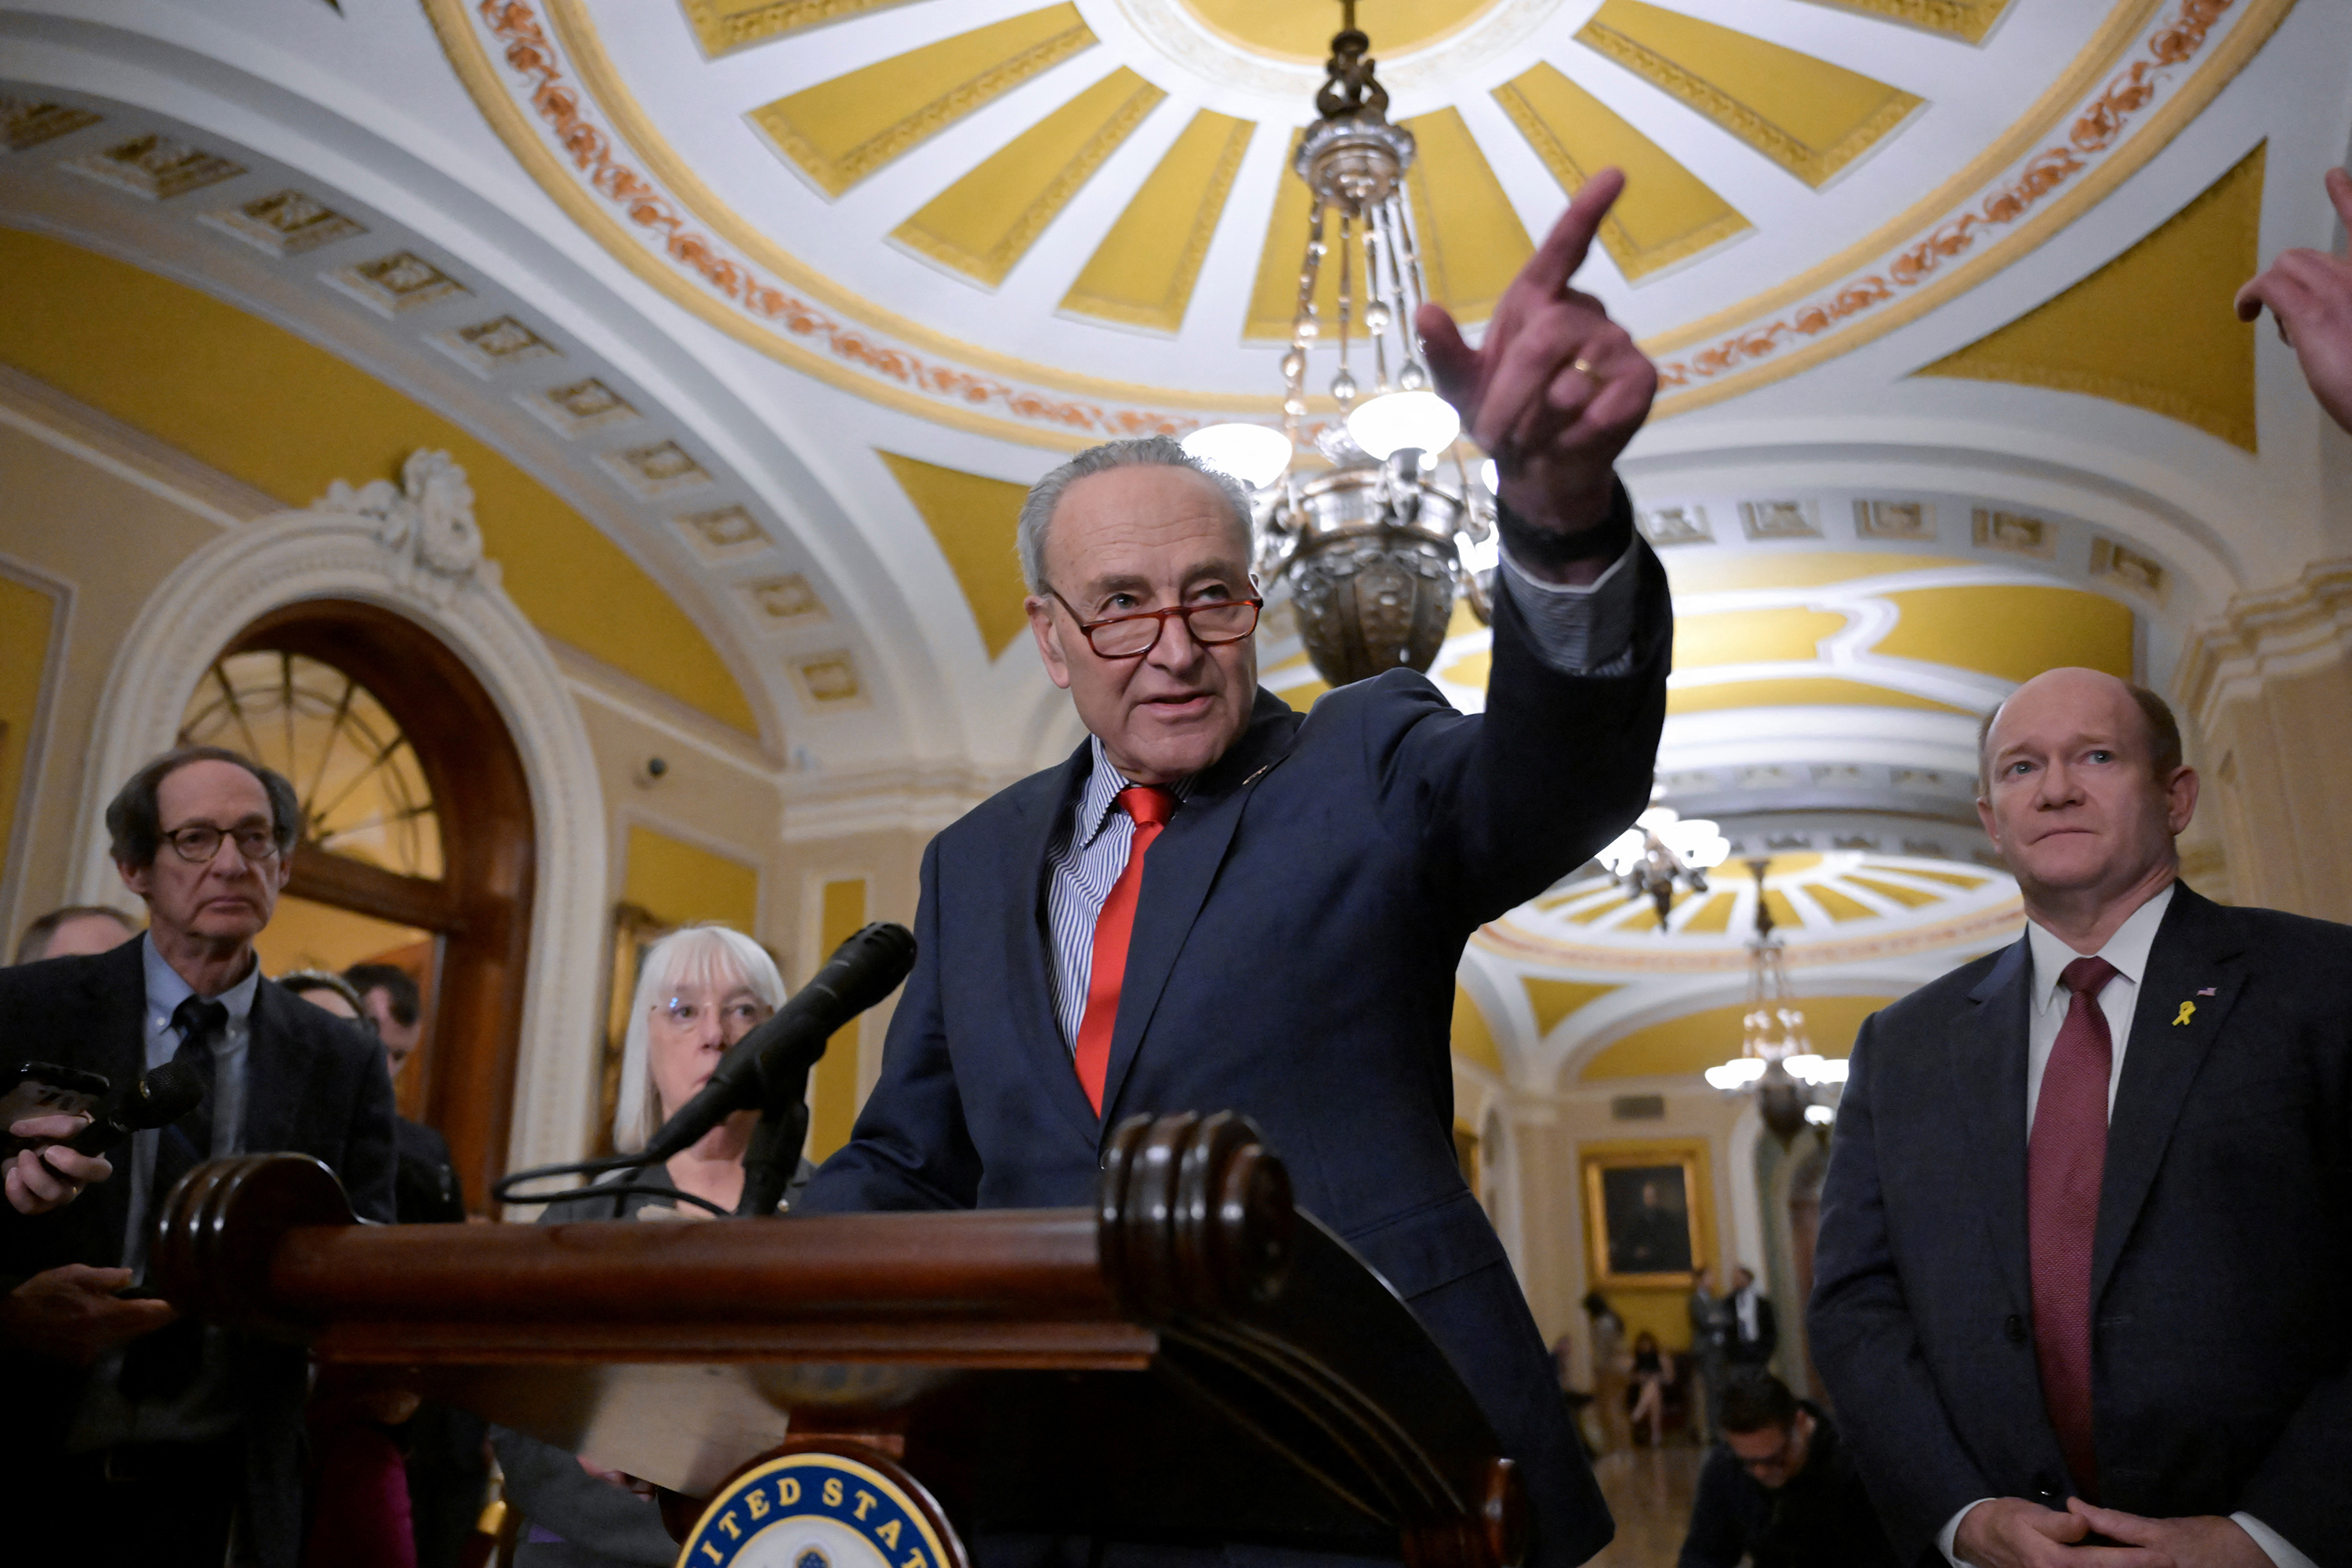 US Senate Majority Leader Chuck Schumer speaks during a press conference on Capitol Hill in Washington, DC, on March 12.